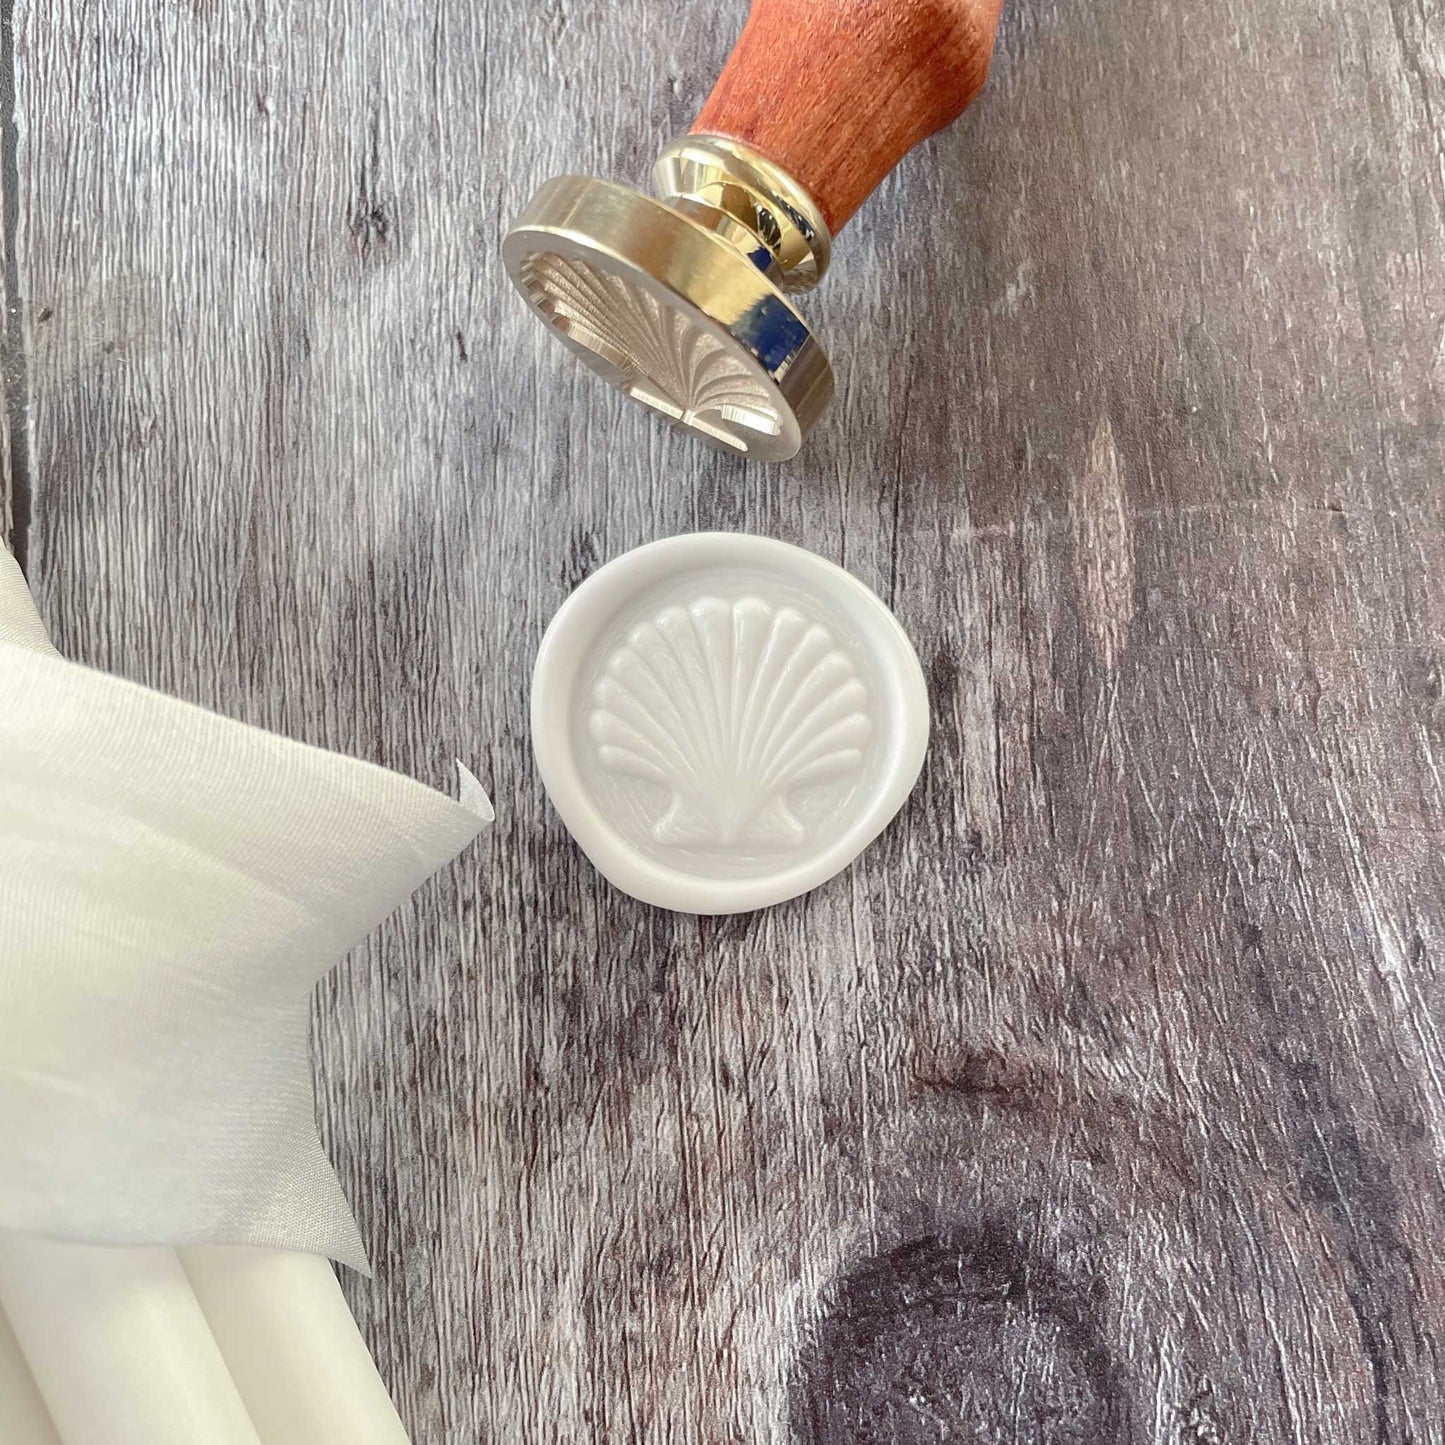 White wax seal with a seashell design.  Make coastal theme wax seals with our eco friendly sealing wax stamp.  Brass wax stamp with a wooden handle.  Perfect for decorating wedding invitations, stationery, envelopes, gift wrap and more.  By The Natural Paper Company